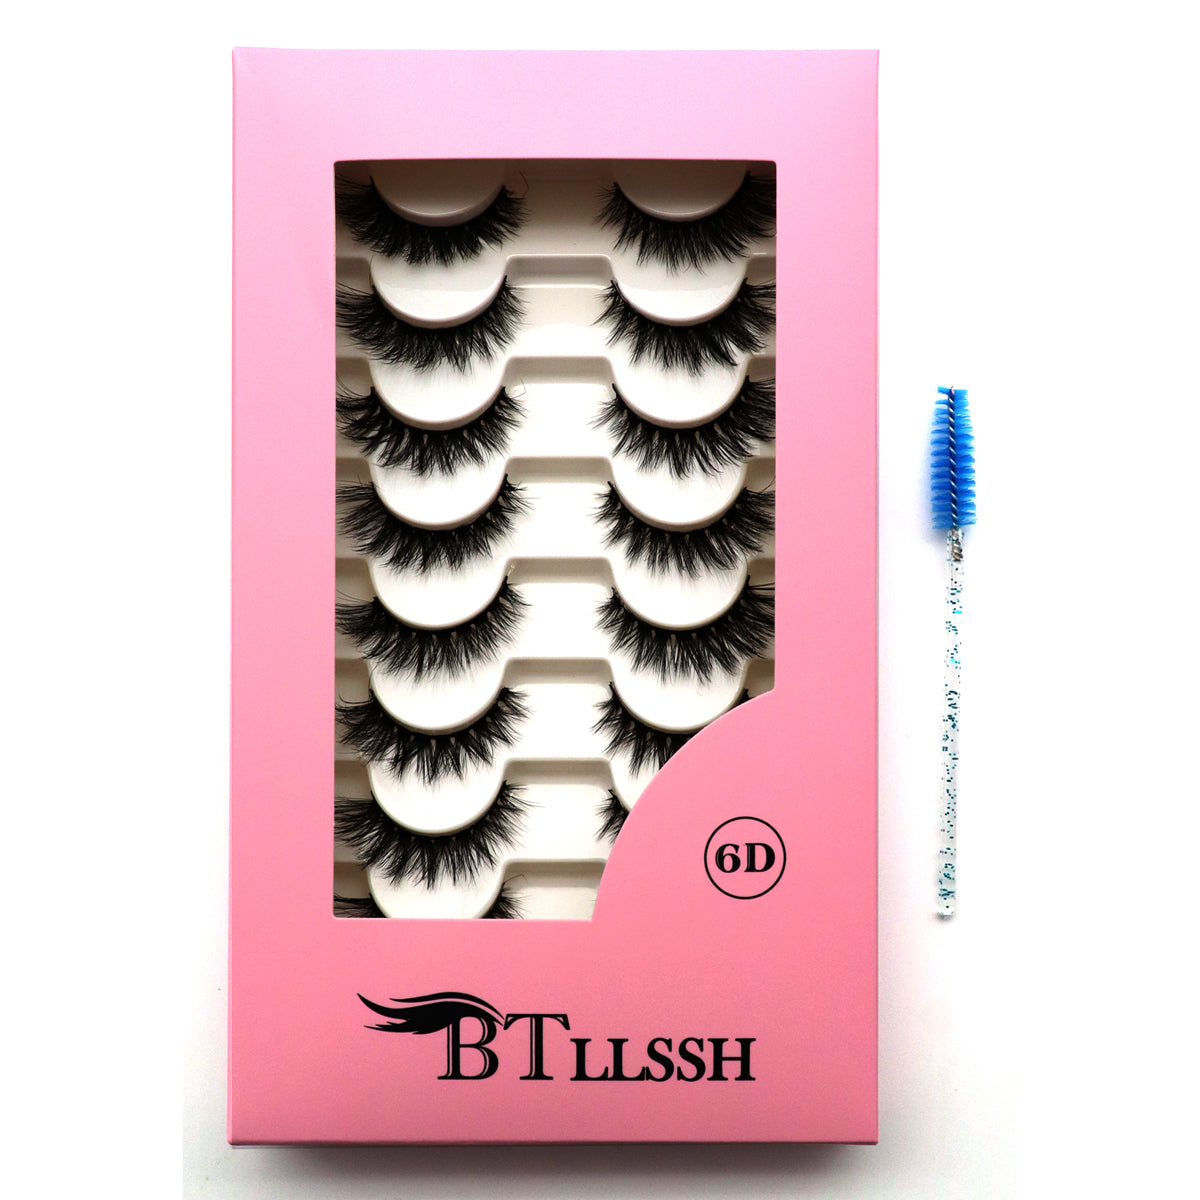 12mm natural lash - 8 pairs lashes with a brush in one box 3D20